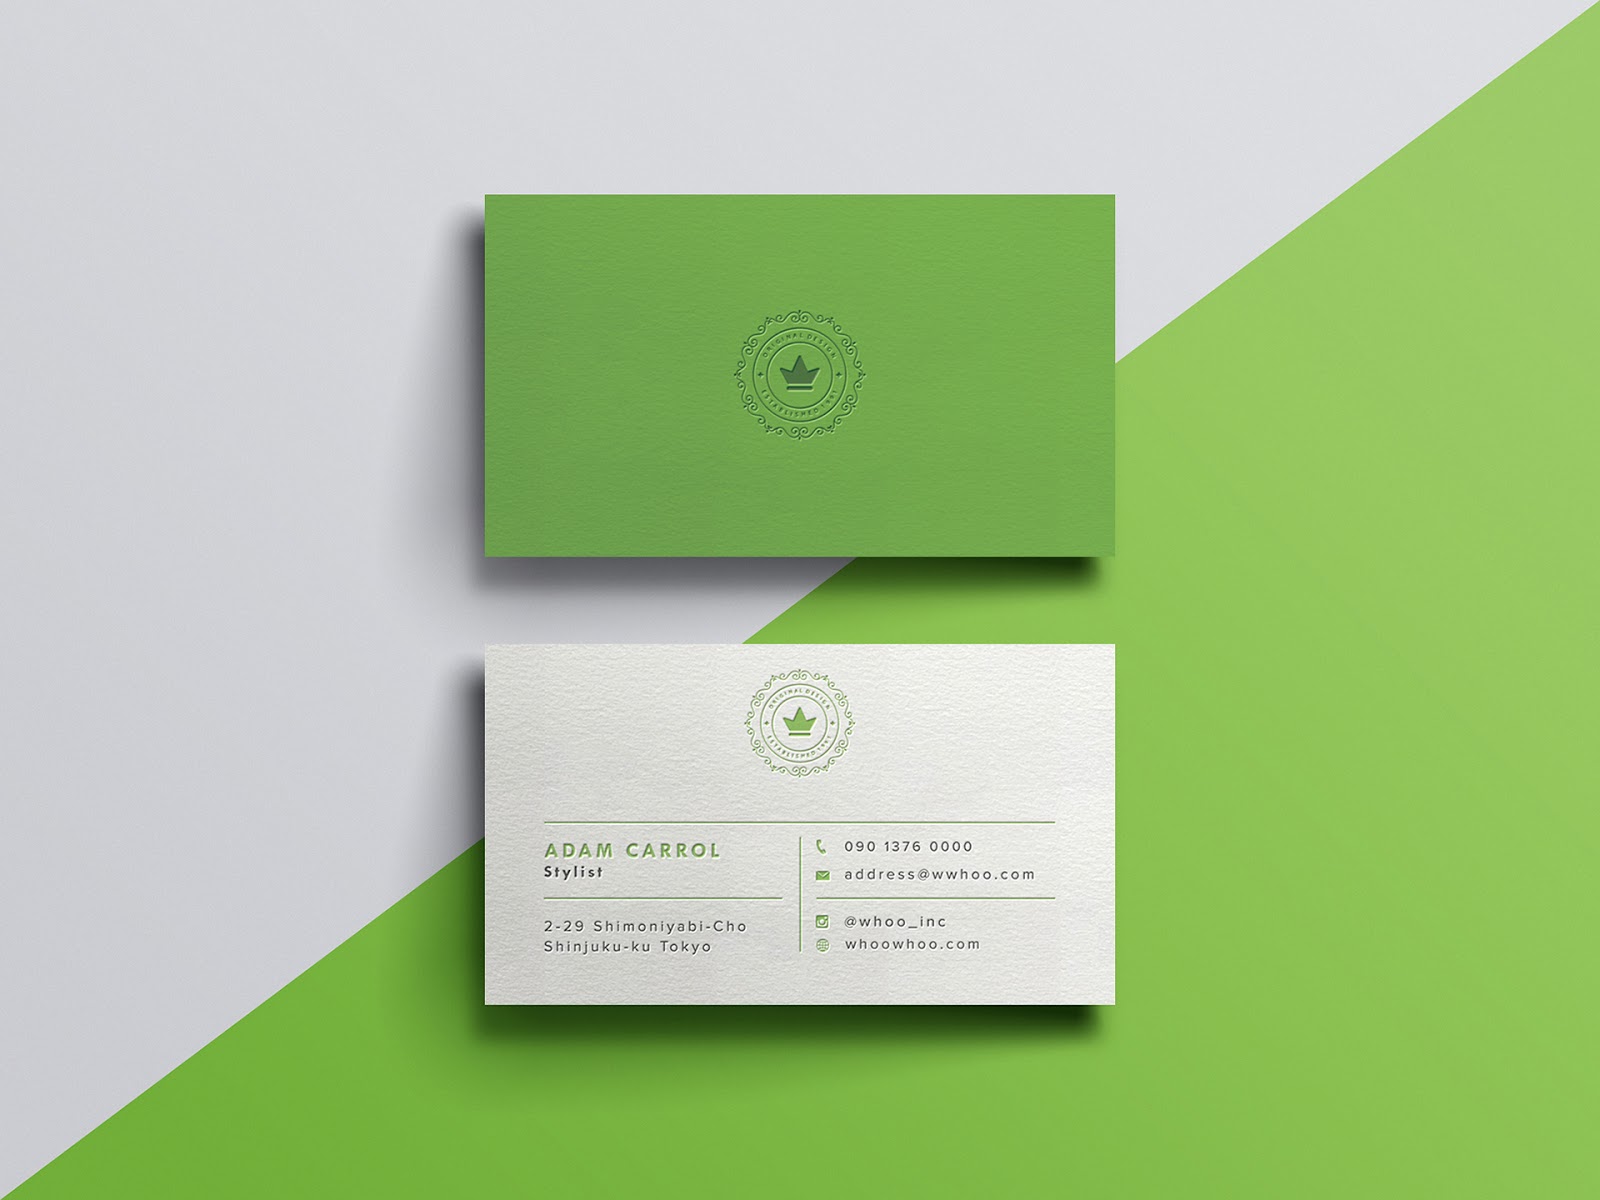 Download Graphic School Business Card Mockup Psd File Free Download Vol 2